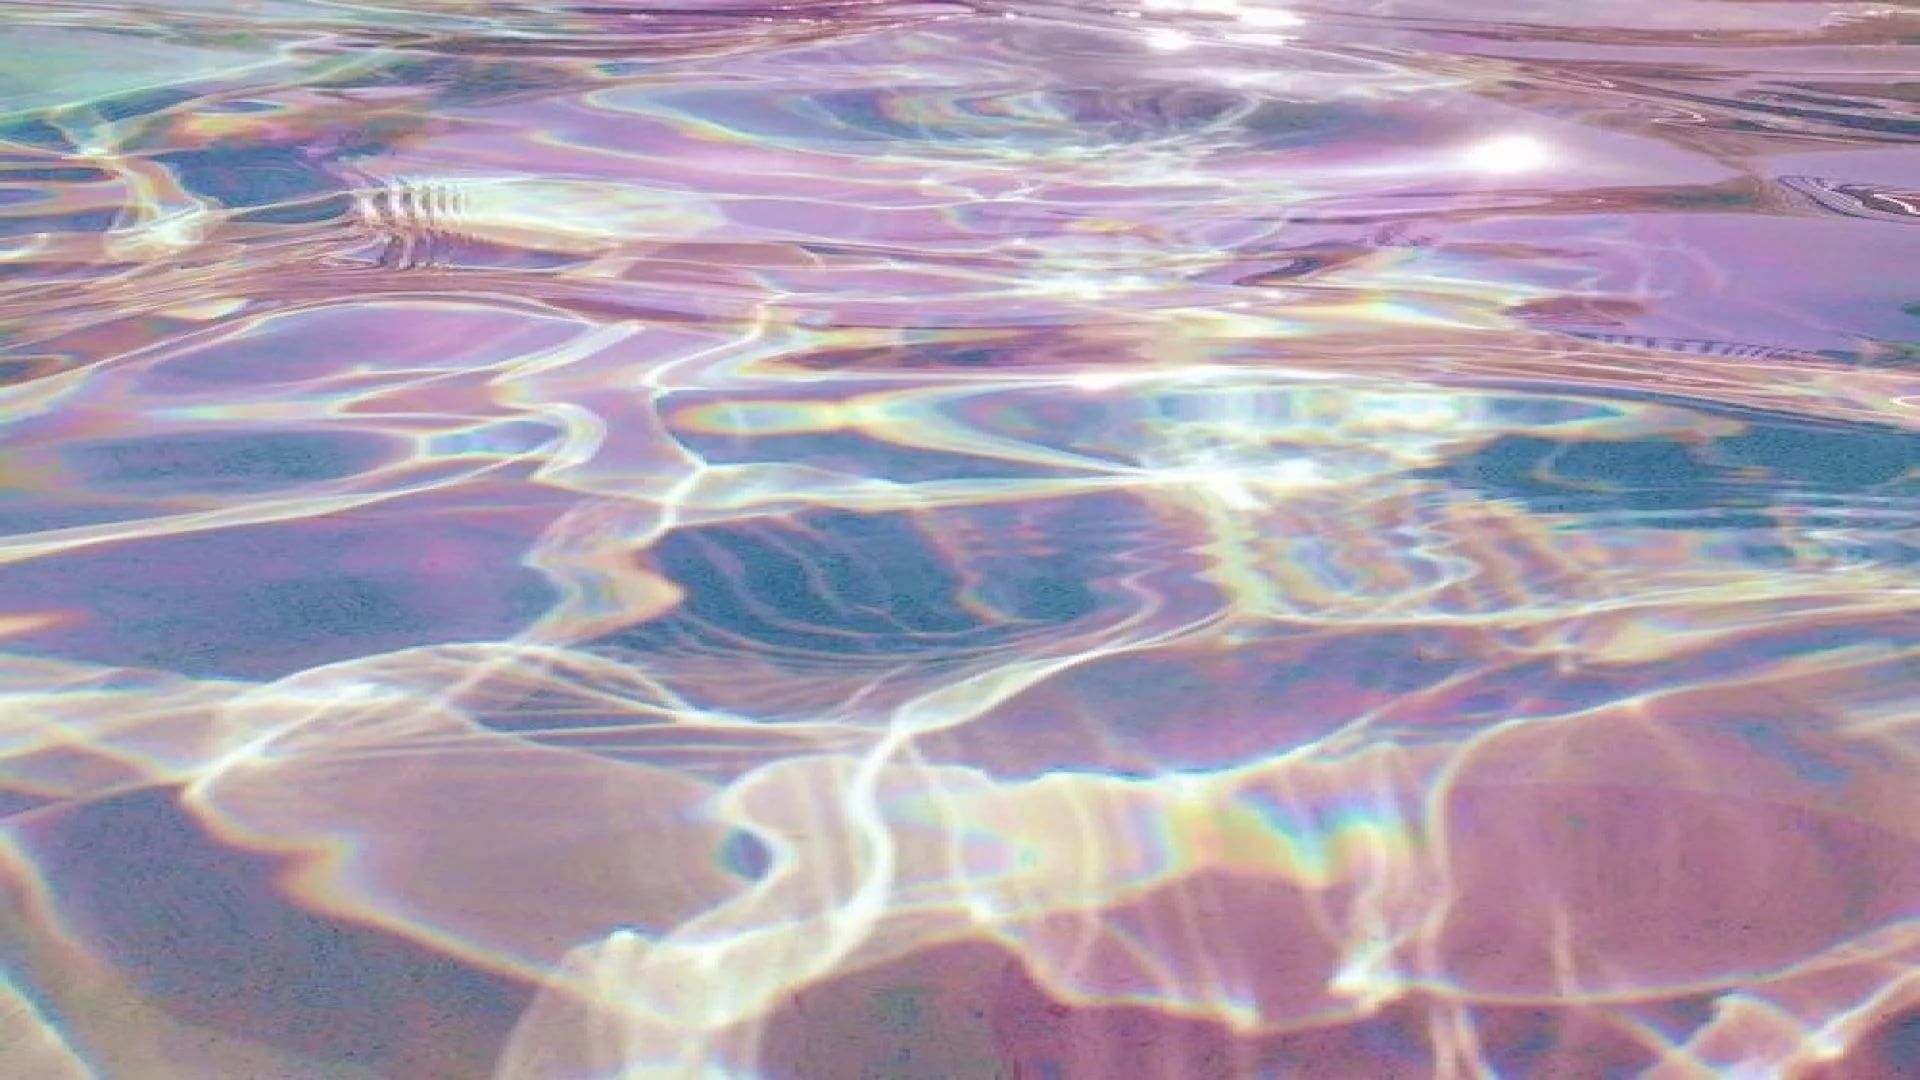 A close up of water with reflections in it - Water